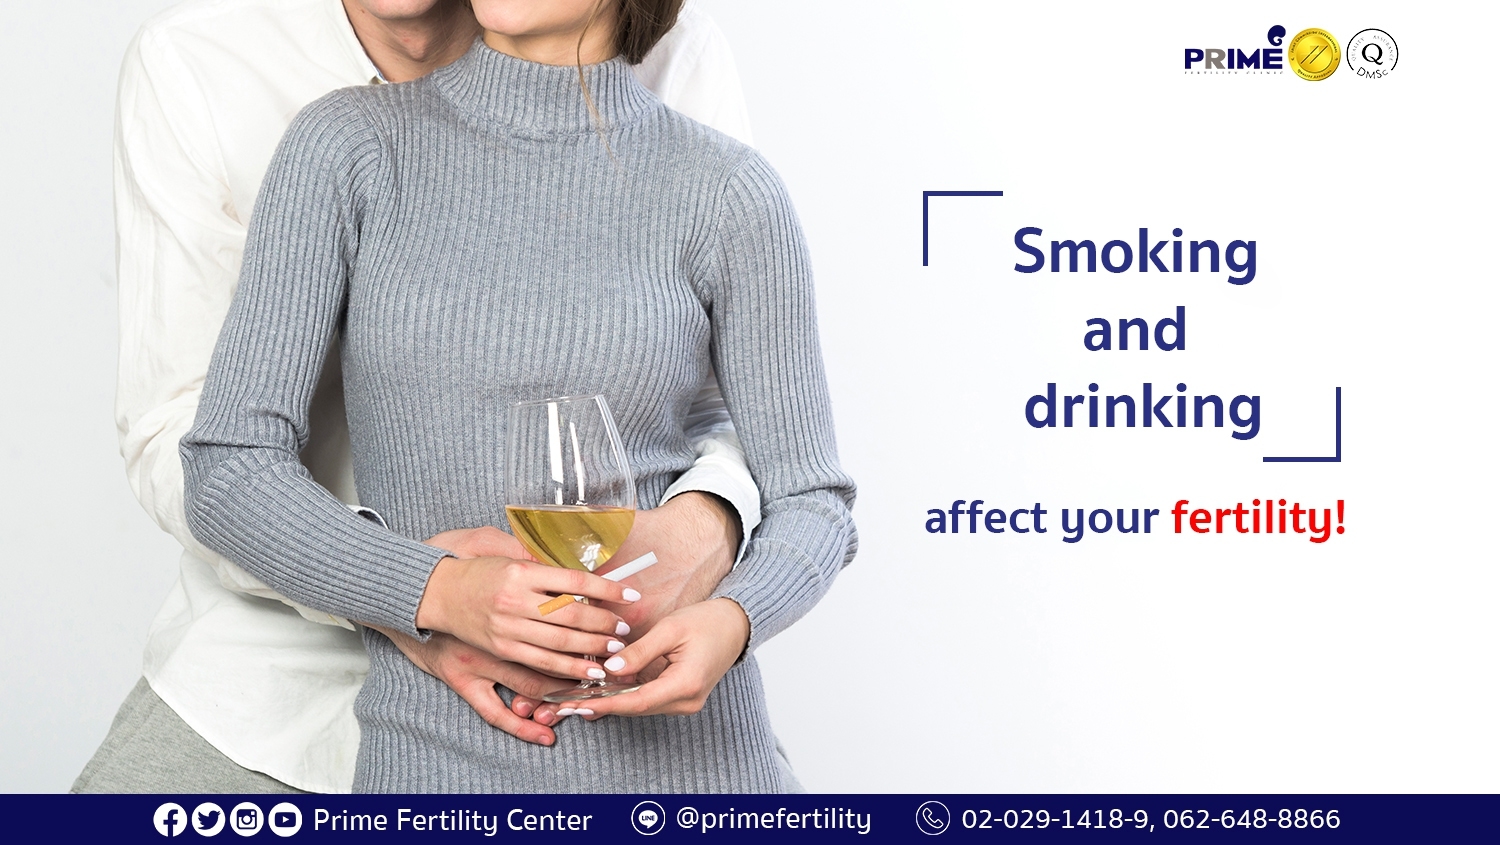 Smoking and drinking affect your fertility!